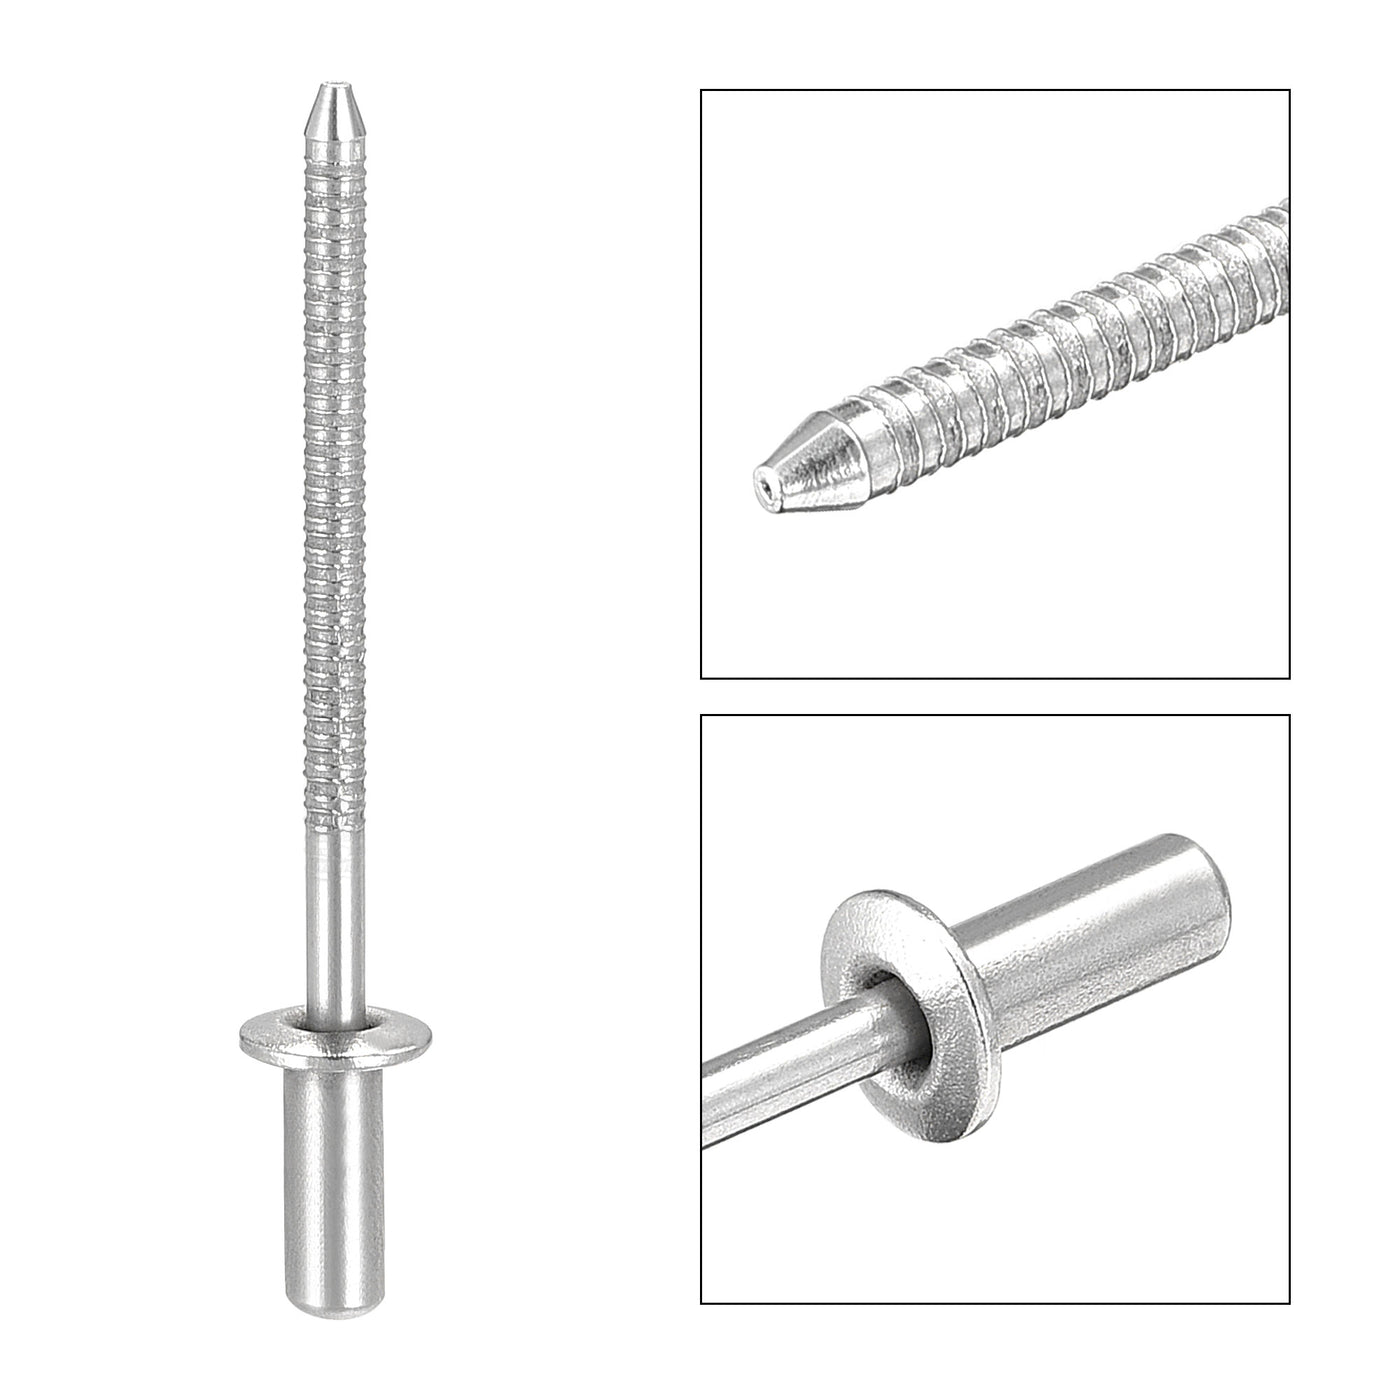 uxcell Uxcell Blind Rivets 304 Stainless Steel 3.2mm Diameter 8mm Grip Length 50pcs